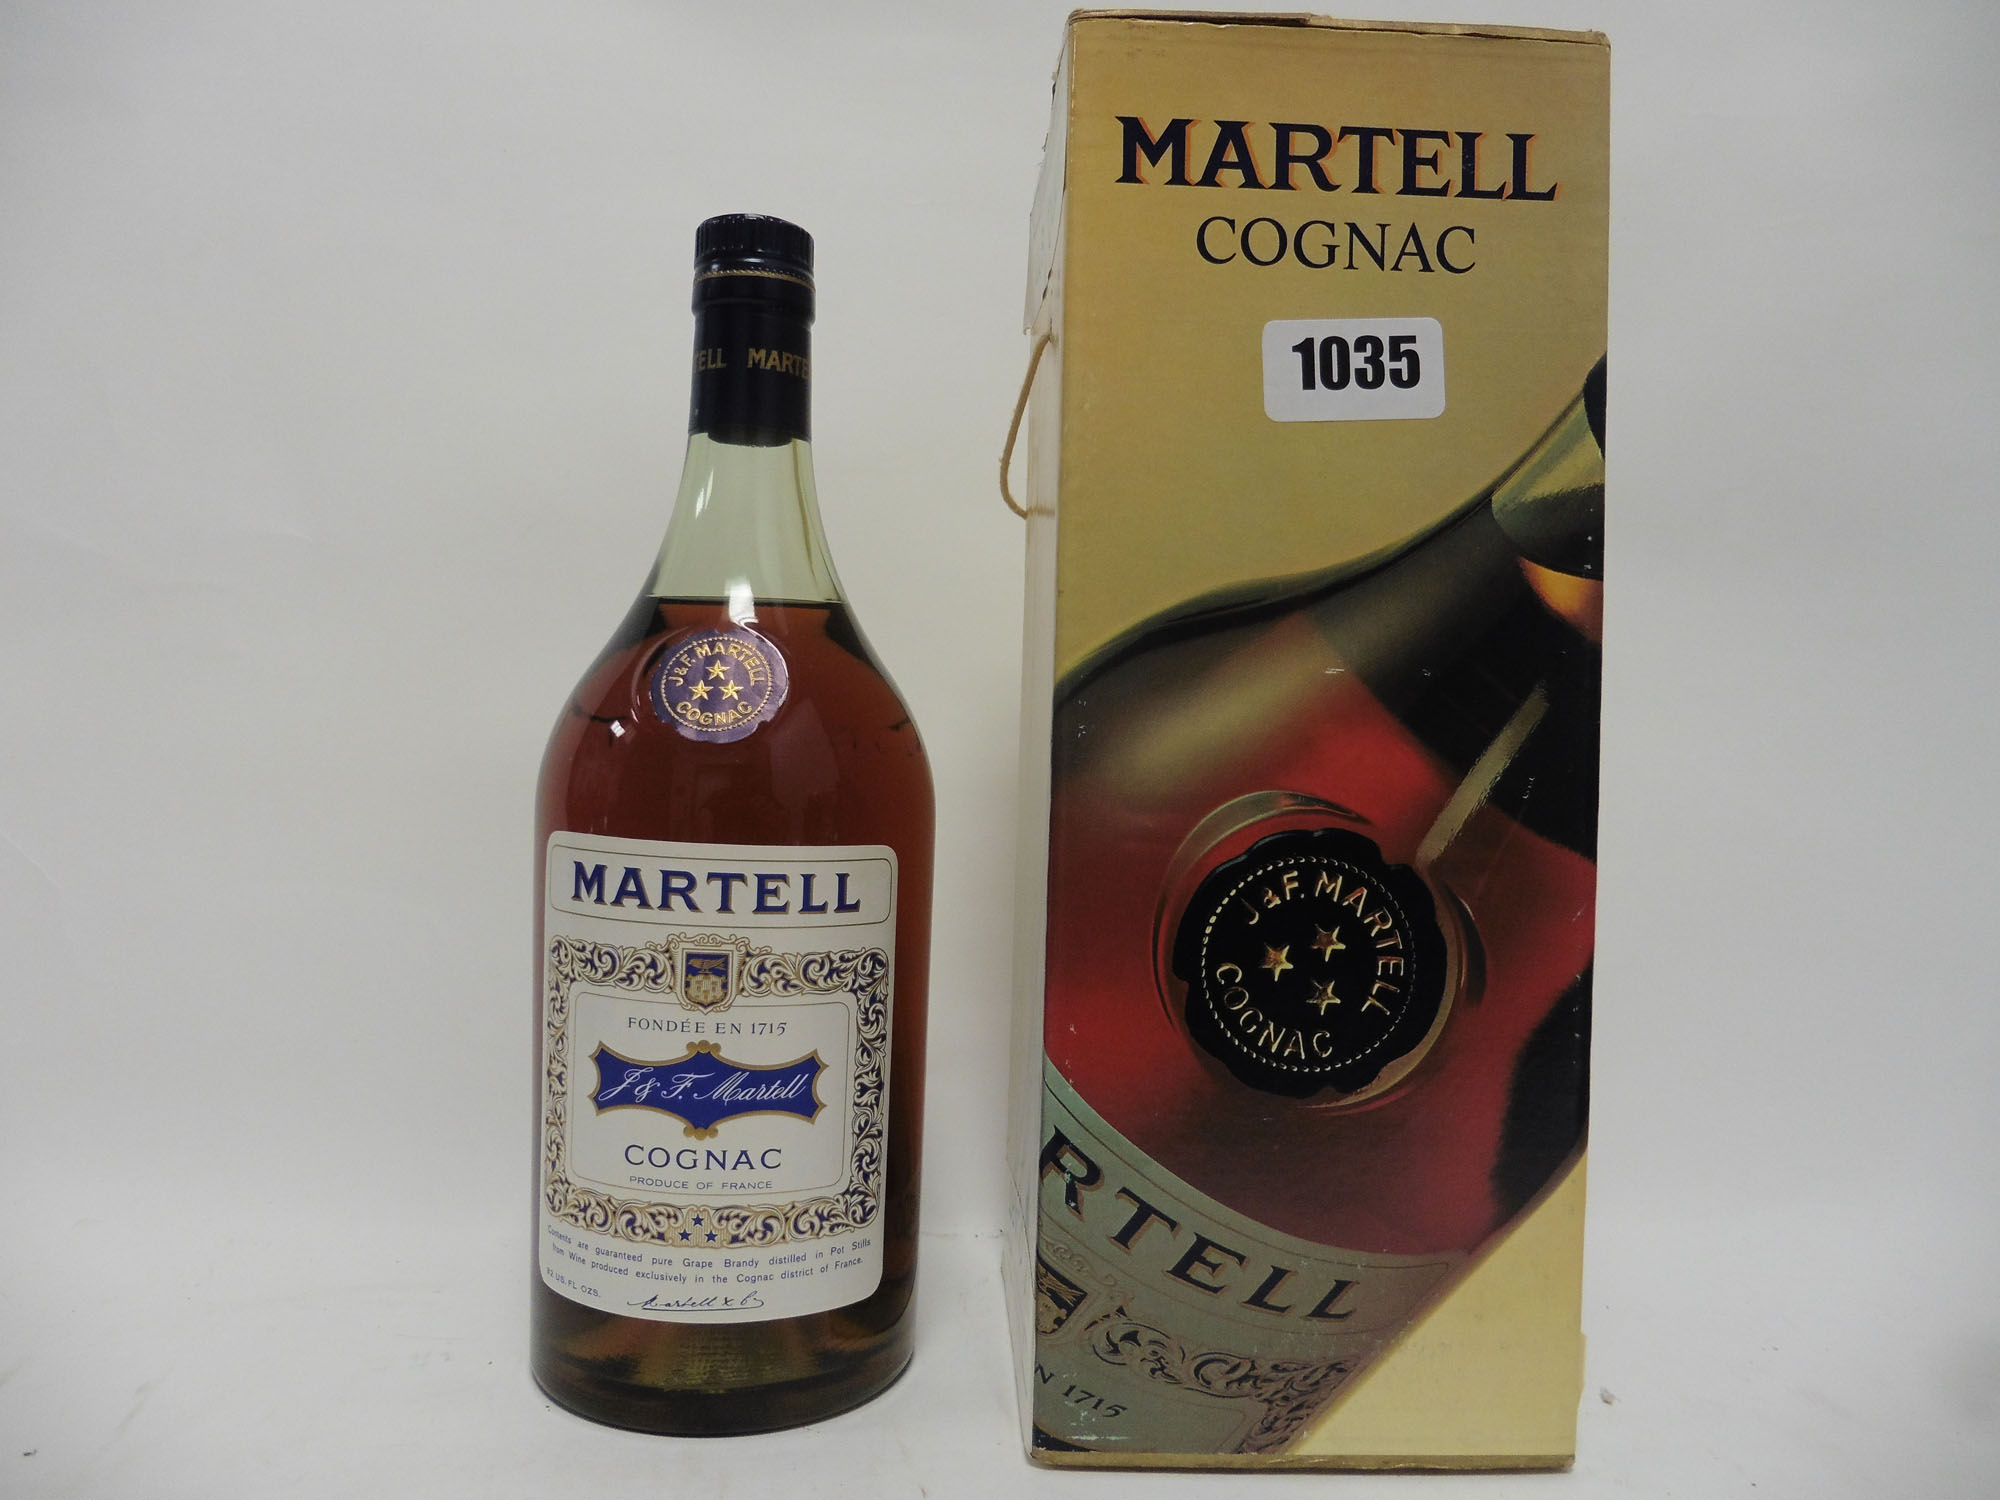 An old bottle of J&F Martell 3 star Cognac with box,